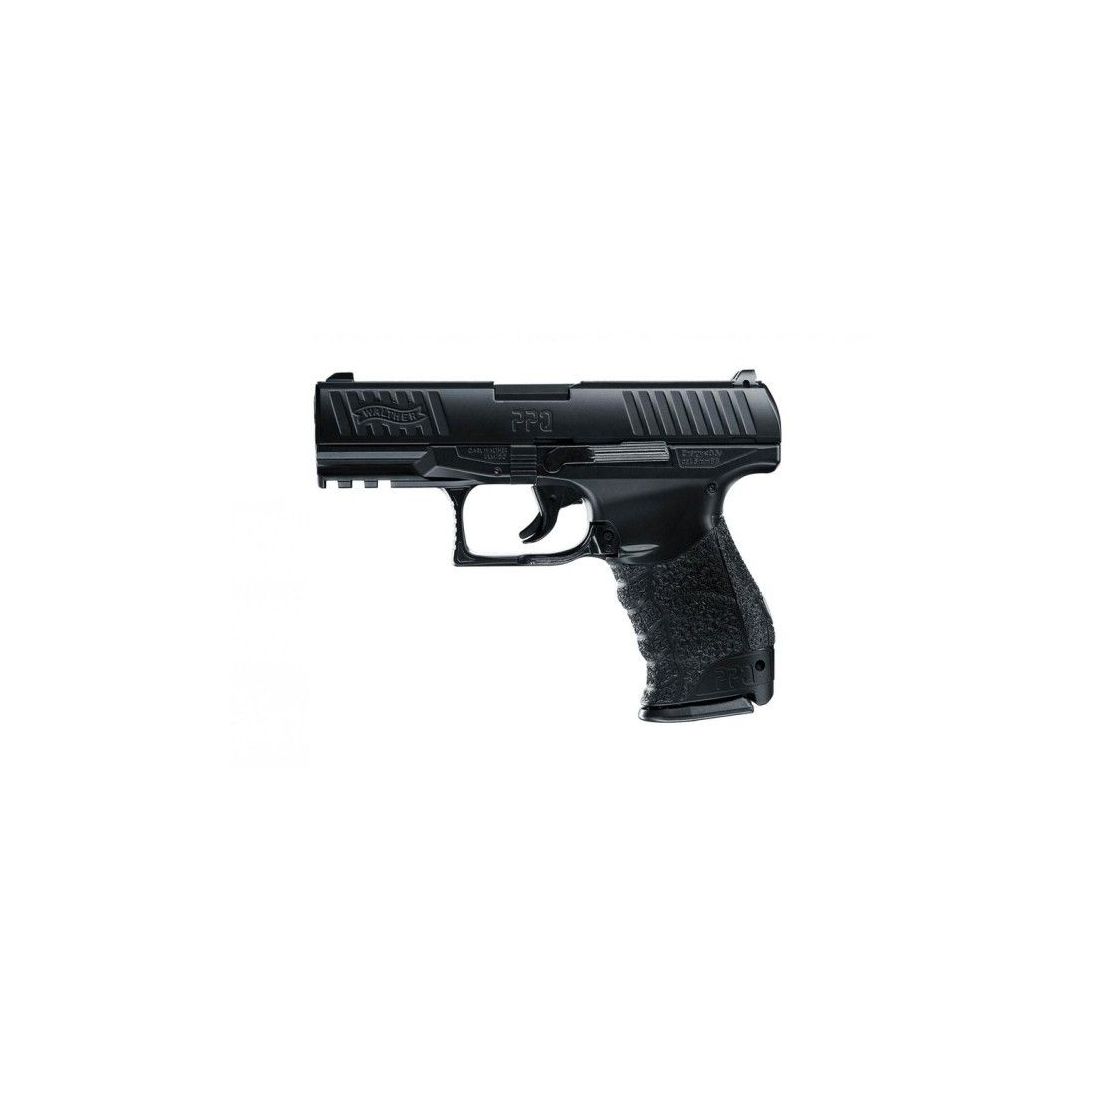 Melancholy the snow's Artificial Pistol Airsoft Arc Umarex Walther PPQ 6mm 14BB 0.5J